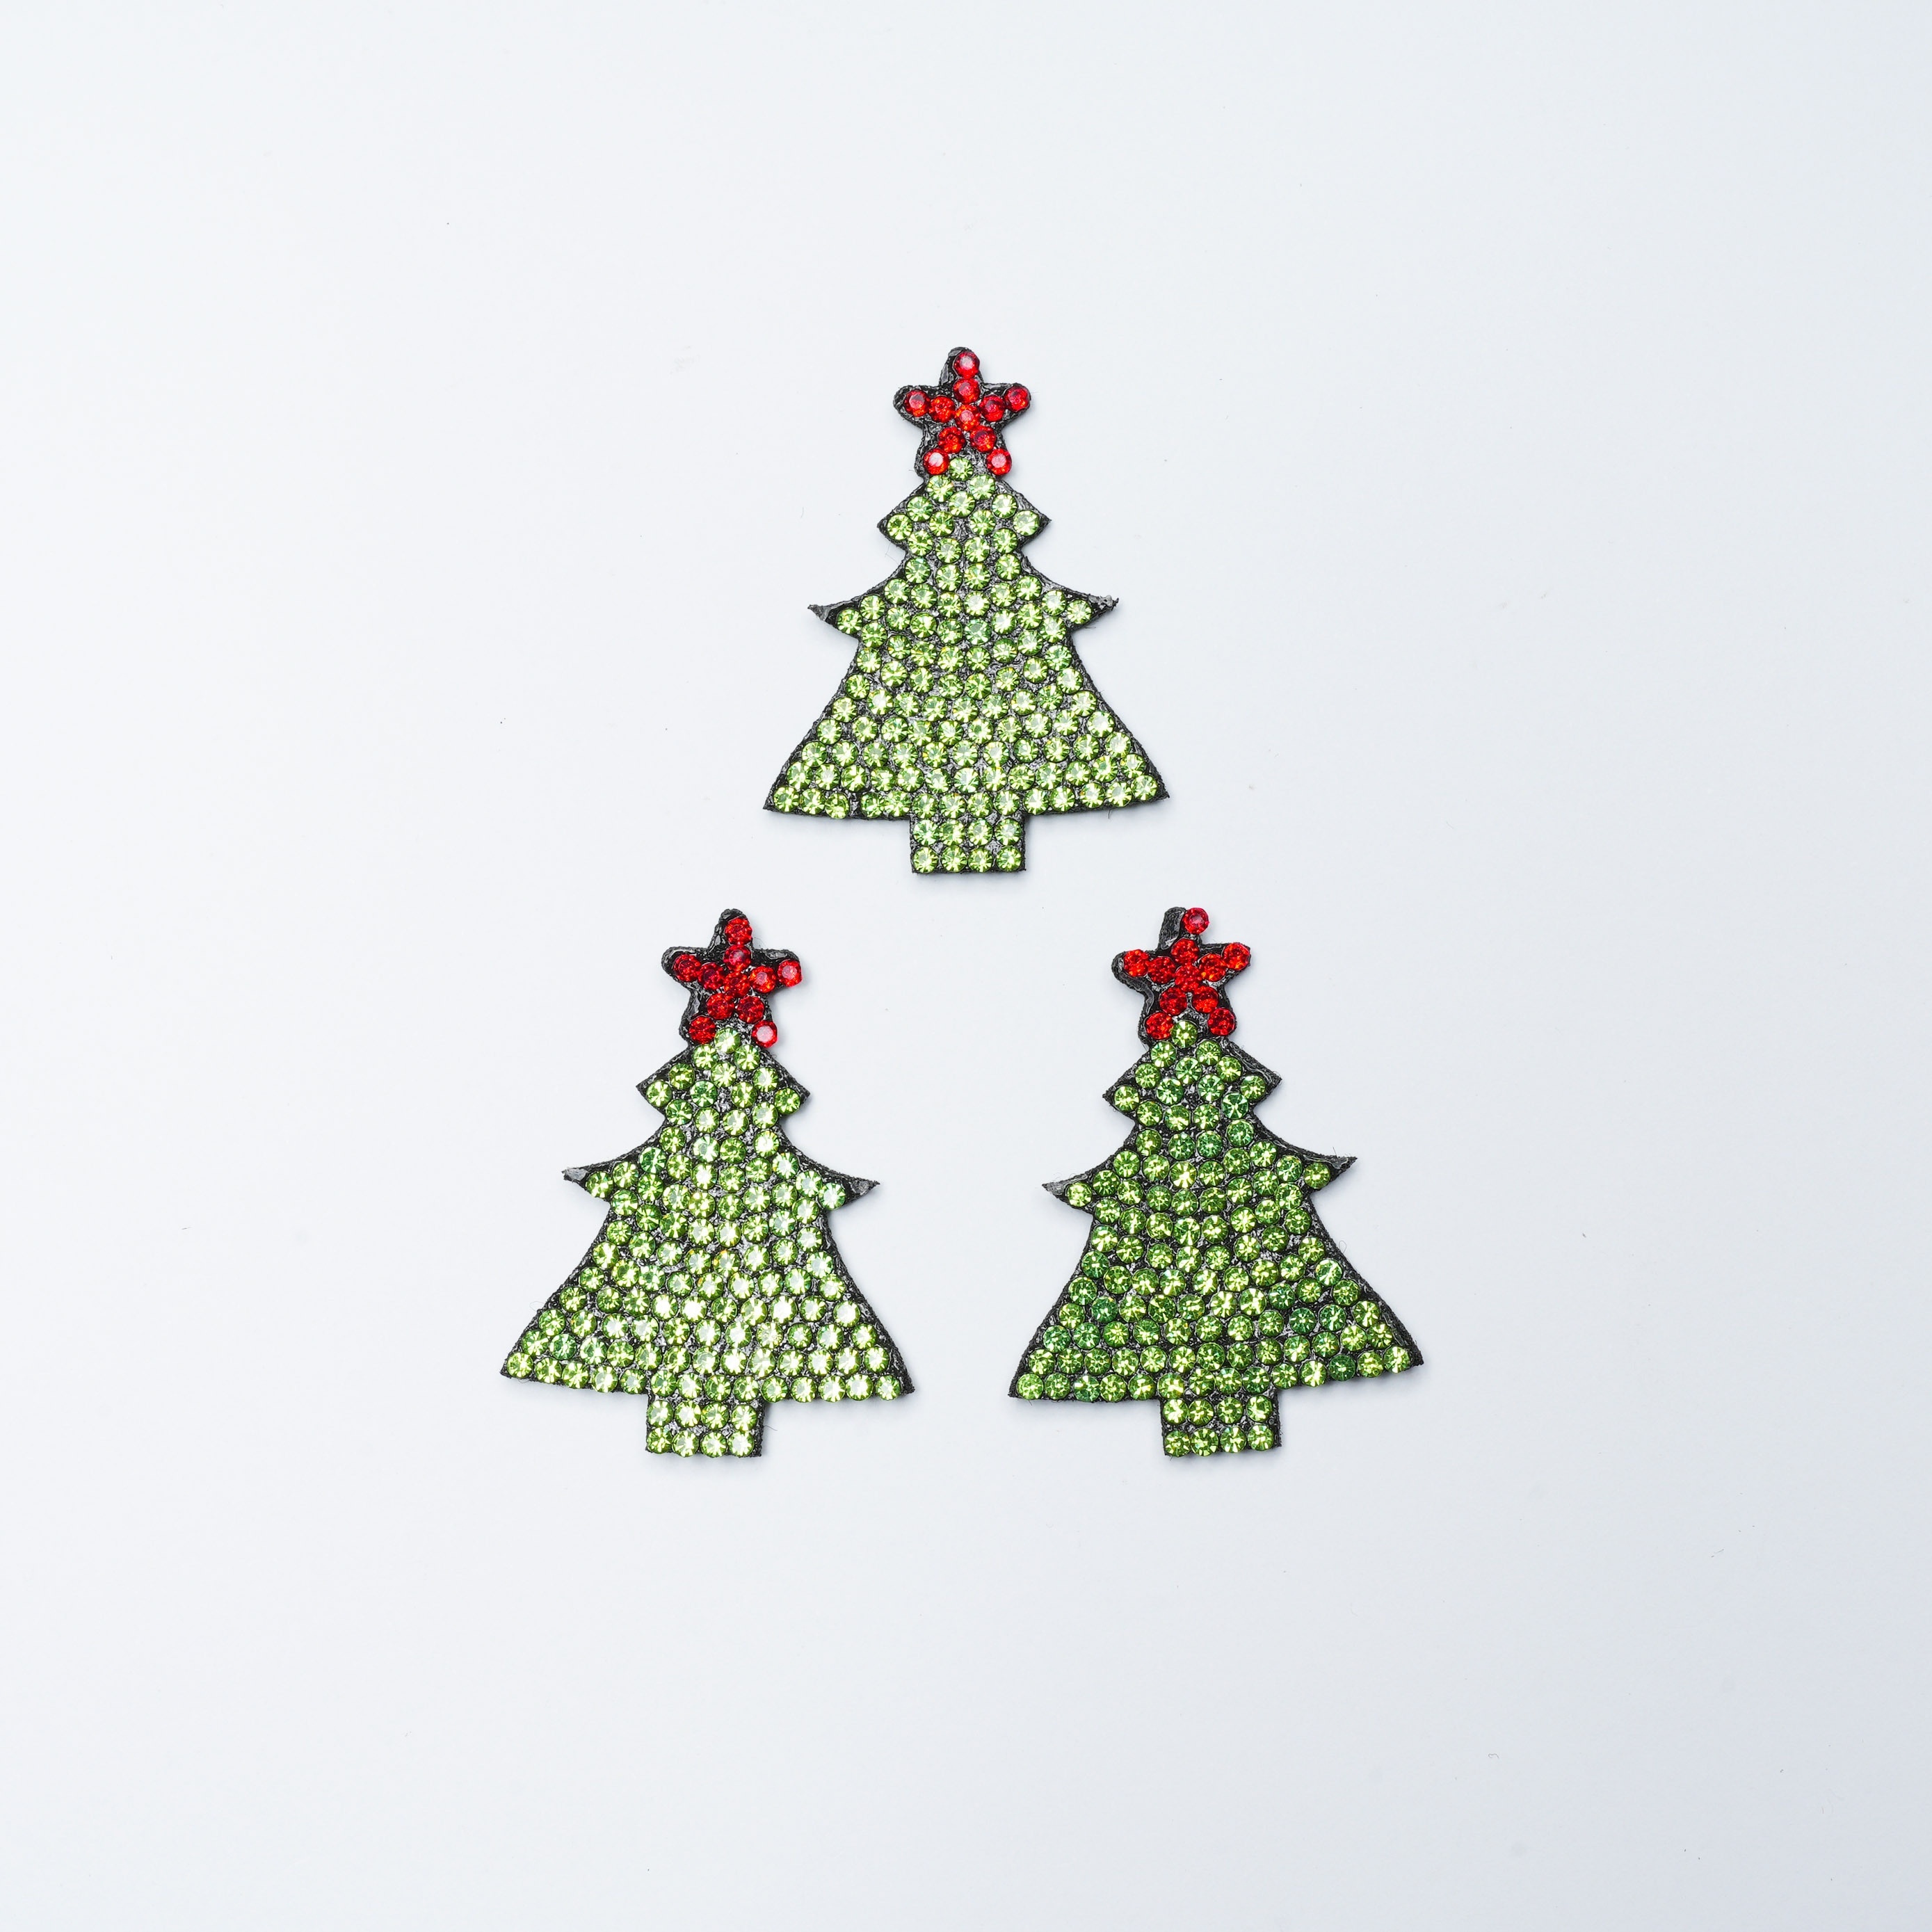 Christmas Patches Sew on Iron on Embroidered 18pcs Xmas Tree Santa Cute Appliques for DIY Crafts Clothes Decorations, Size: Small